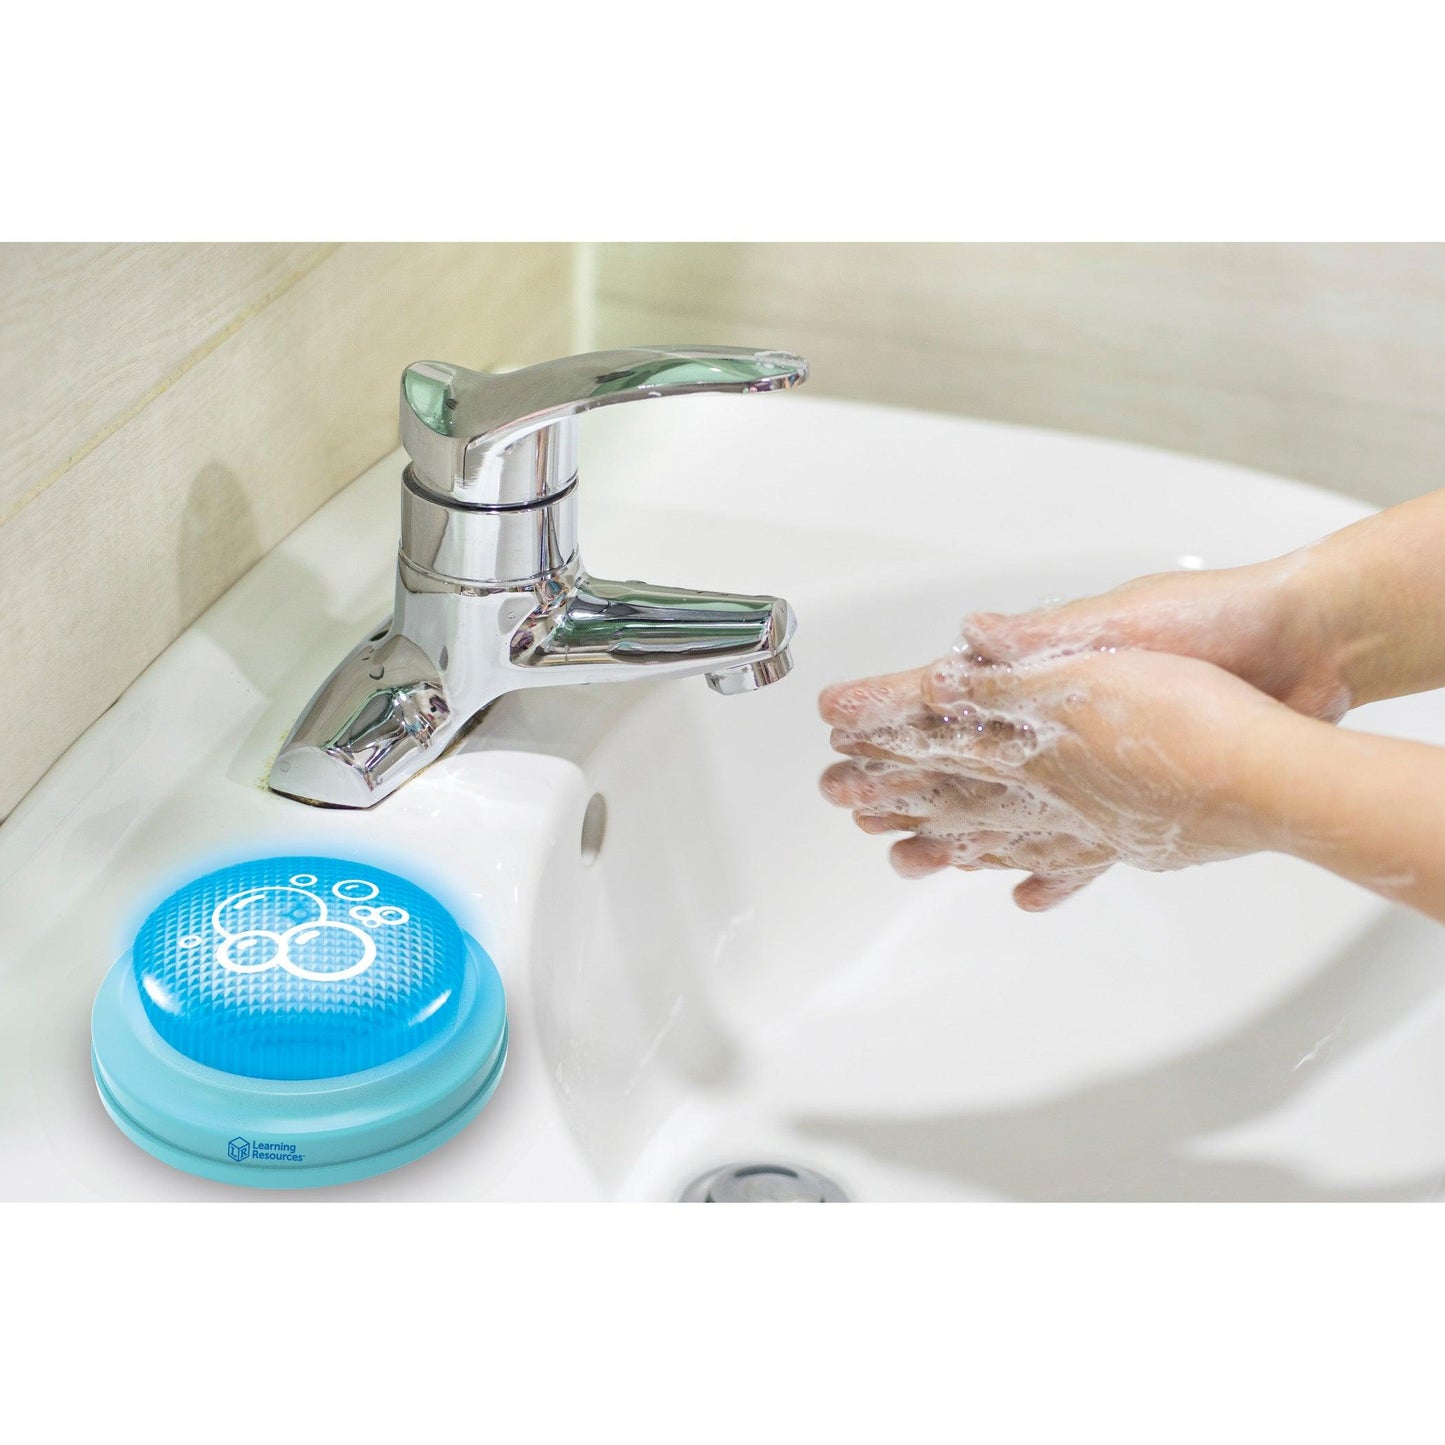 20-Second Handwashing Timer, Pack of 2 - Loomini